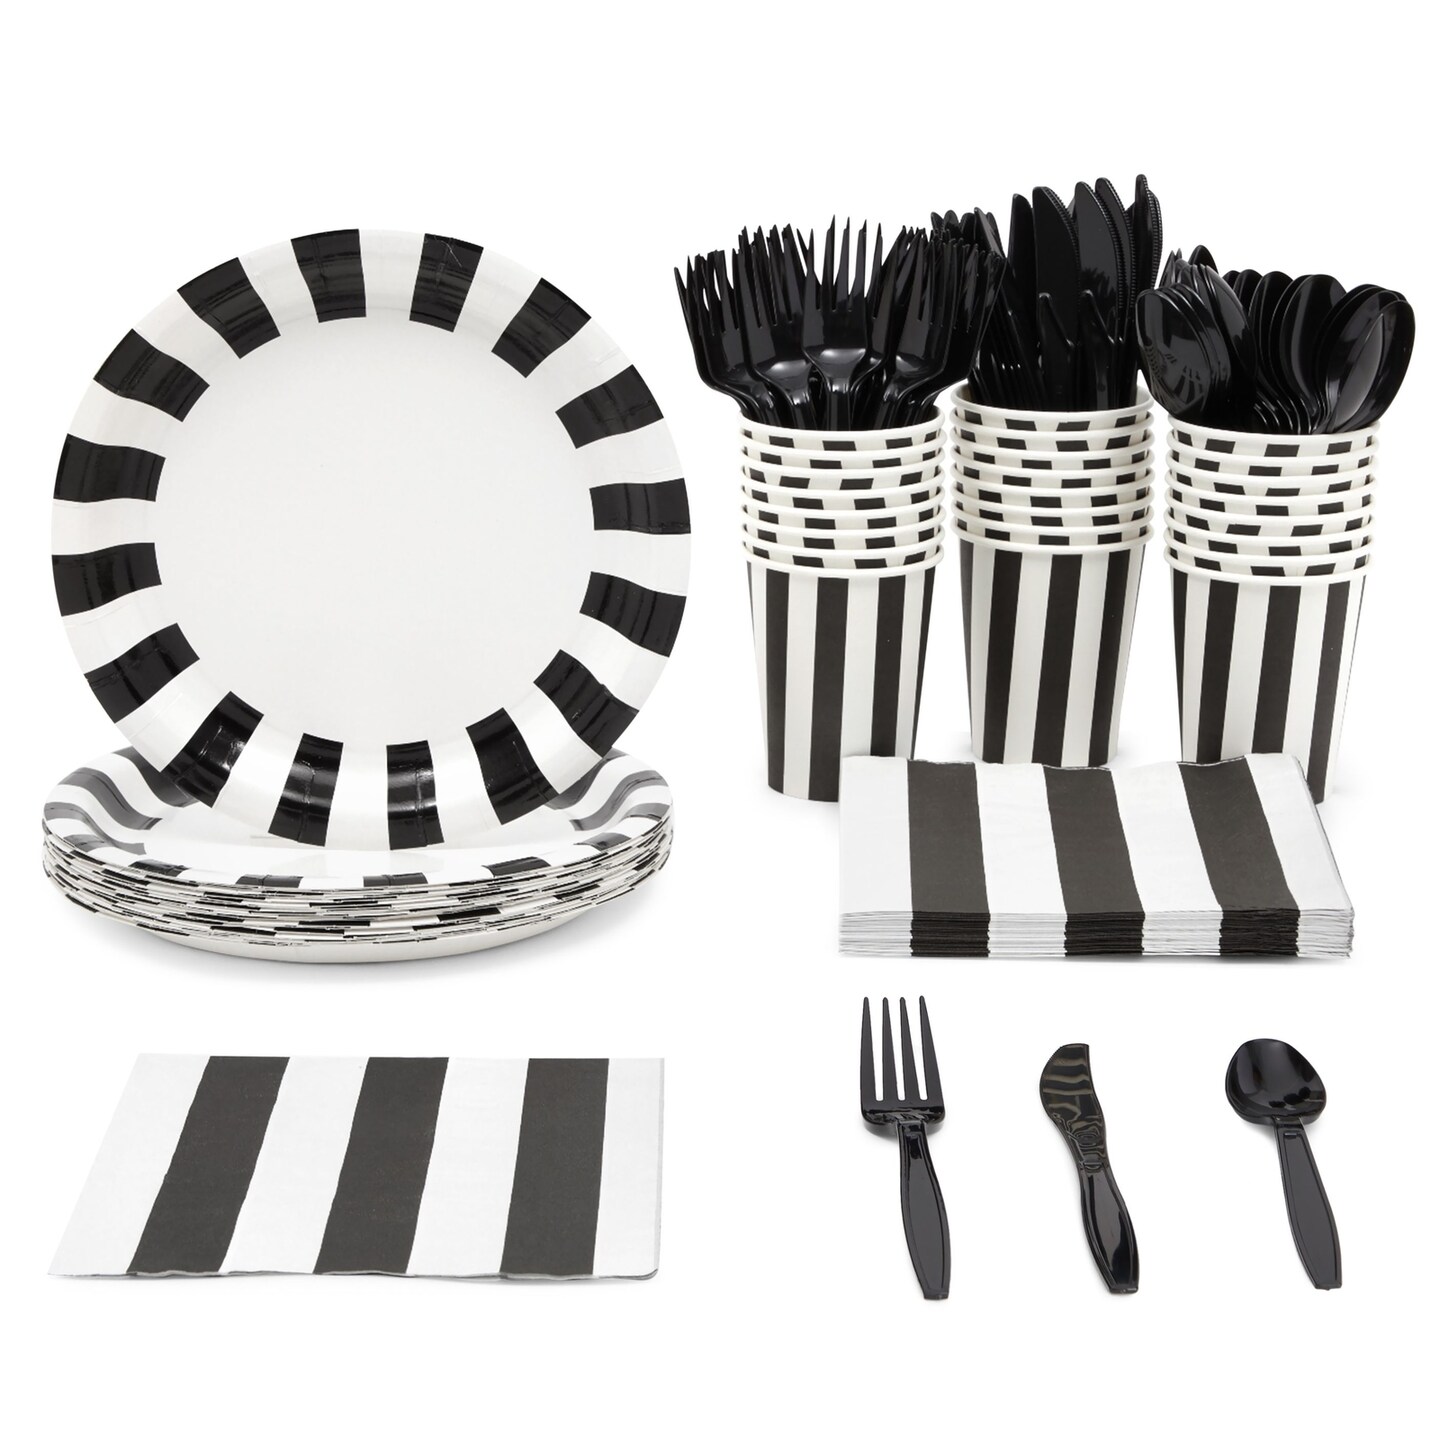 144 Piece Black and White Party Decorations - Serves 24 Striped Party  Supplies with Plates, Napkins, Cups and Cutlery for Birthday, Graduation